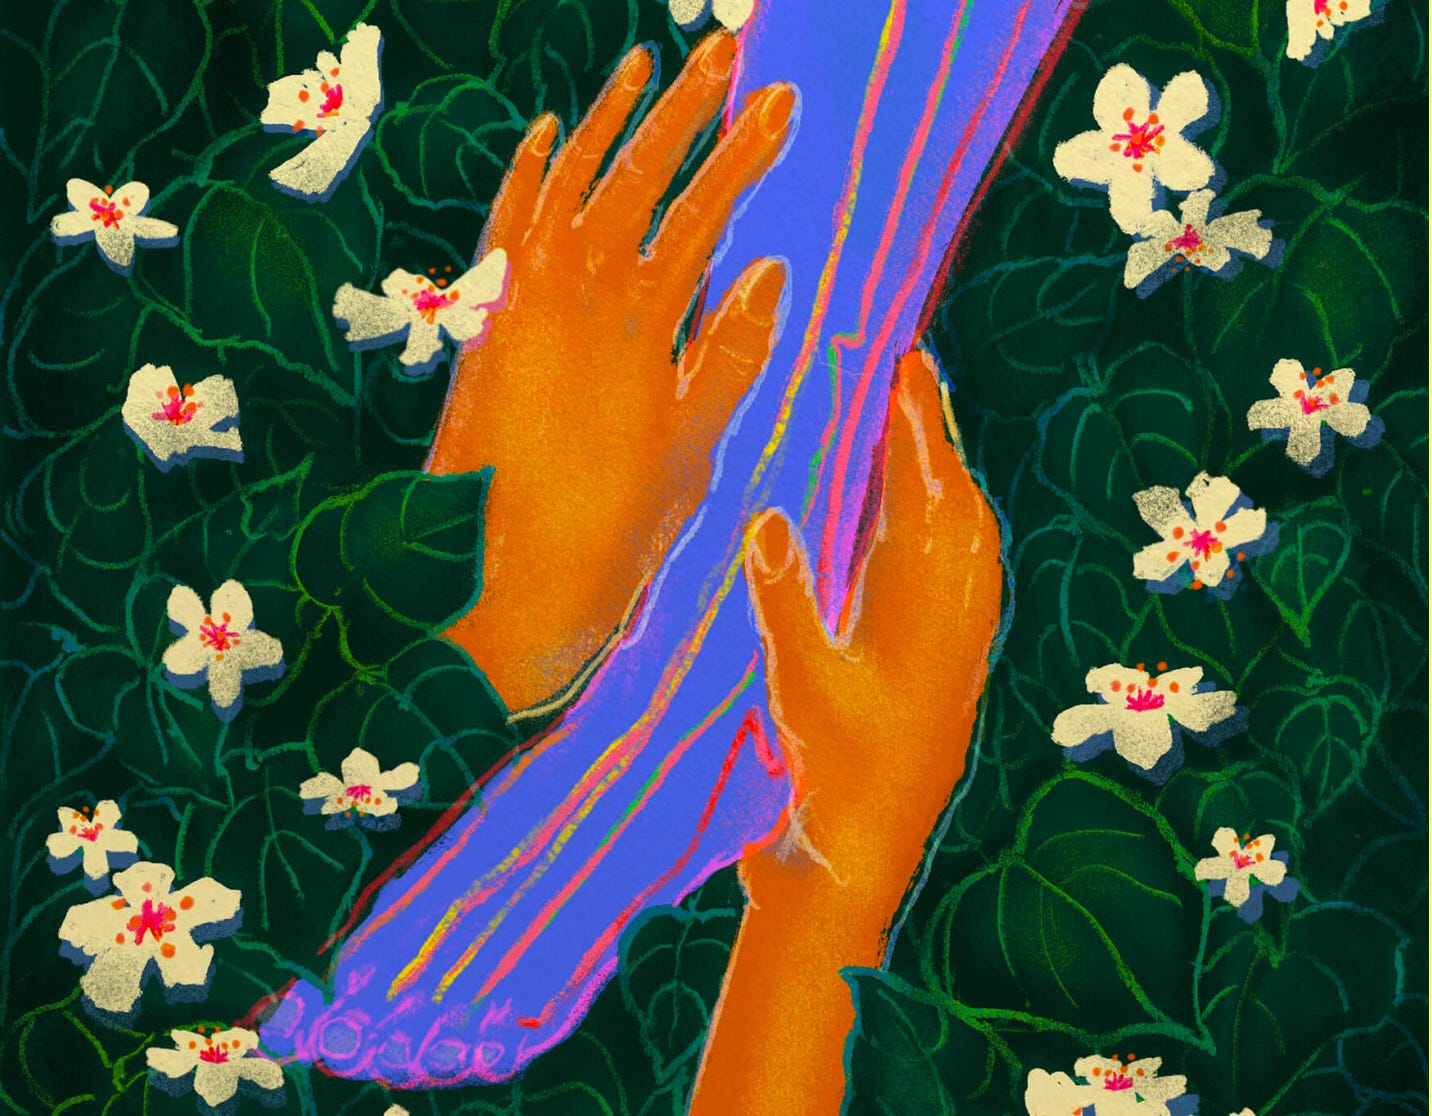 An illustration of two orange-colored hands massaging an ethereal light blue lower leg. The leg has multicolored lines running over it, outlining the chi channels of the body. The hands and leg are nestled in a field of green leaves dotted with tung blossoms: tropical white flowers with pink centers.